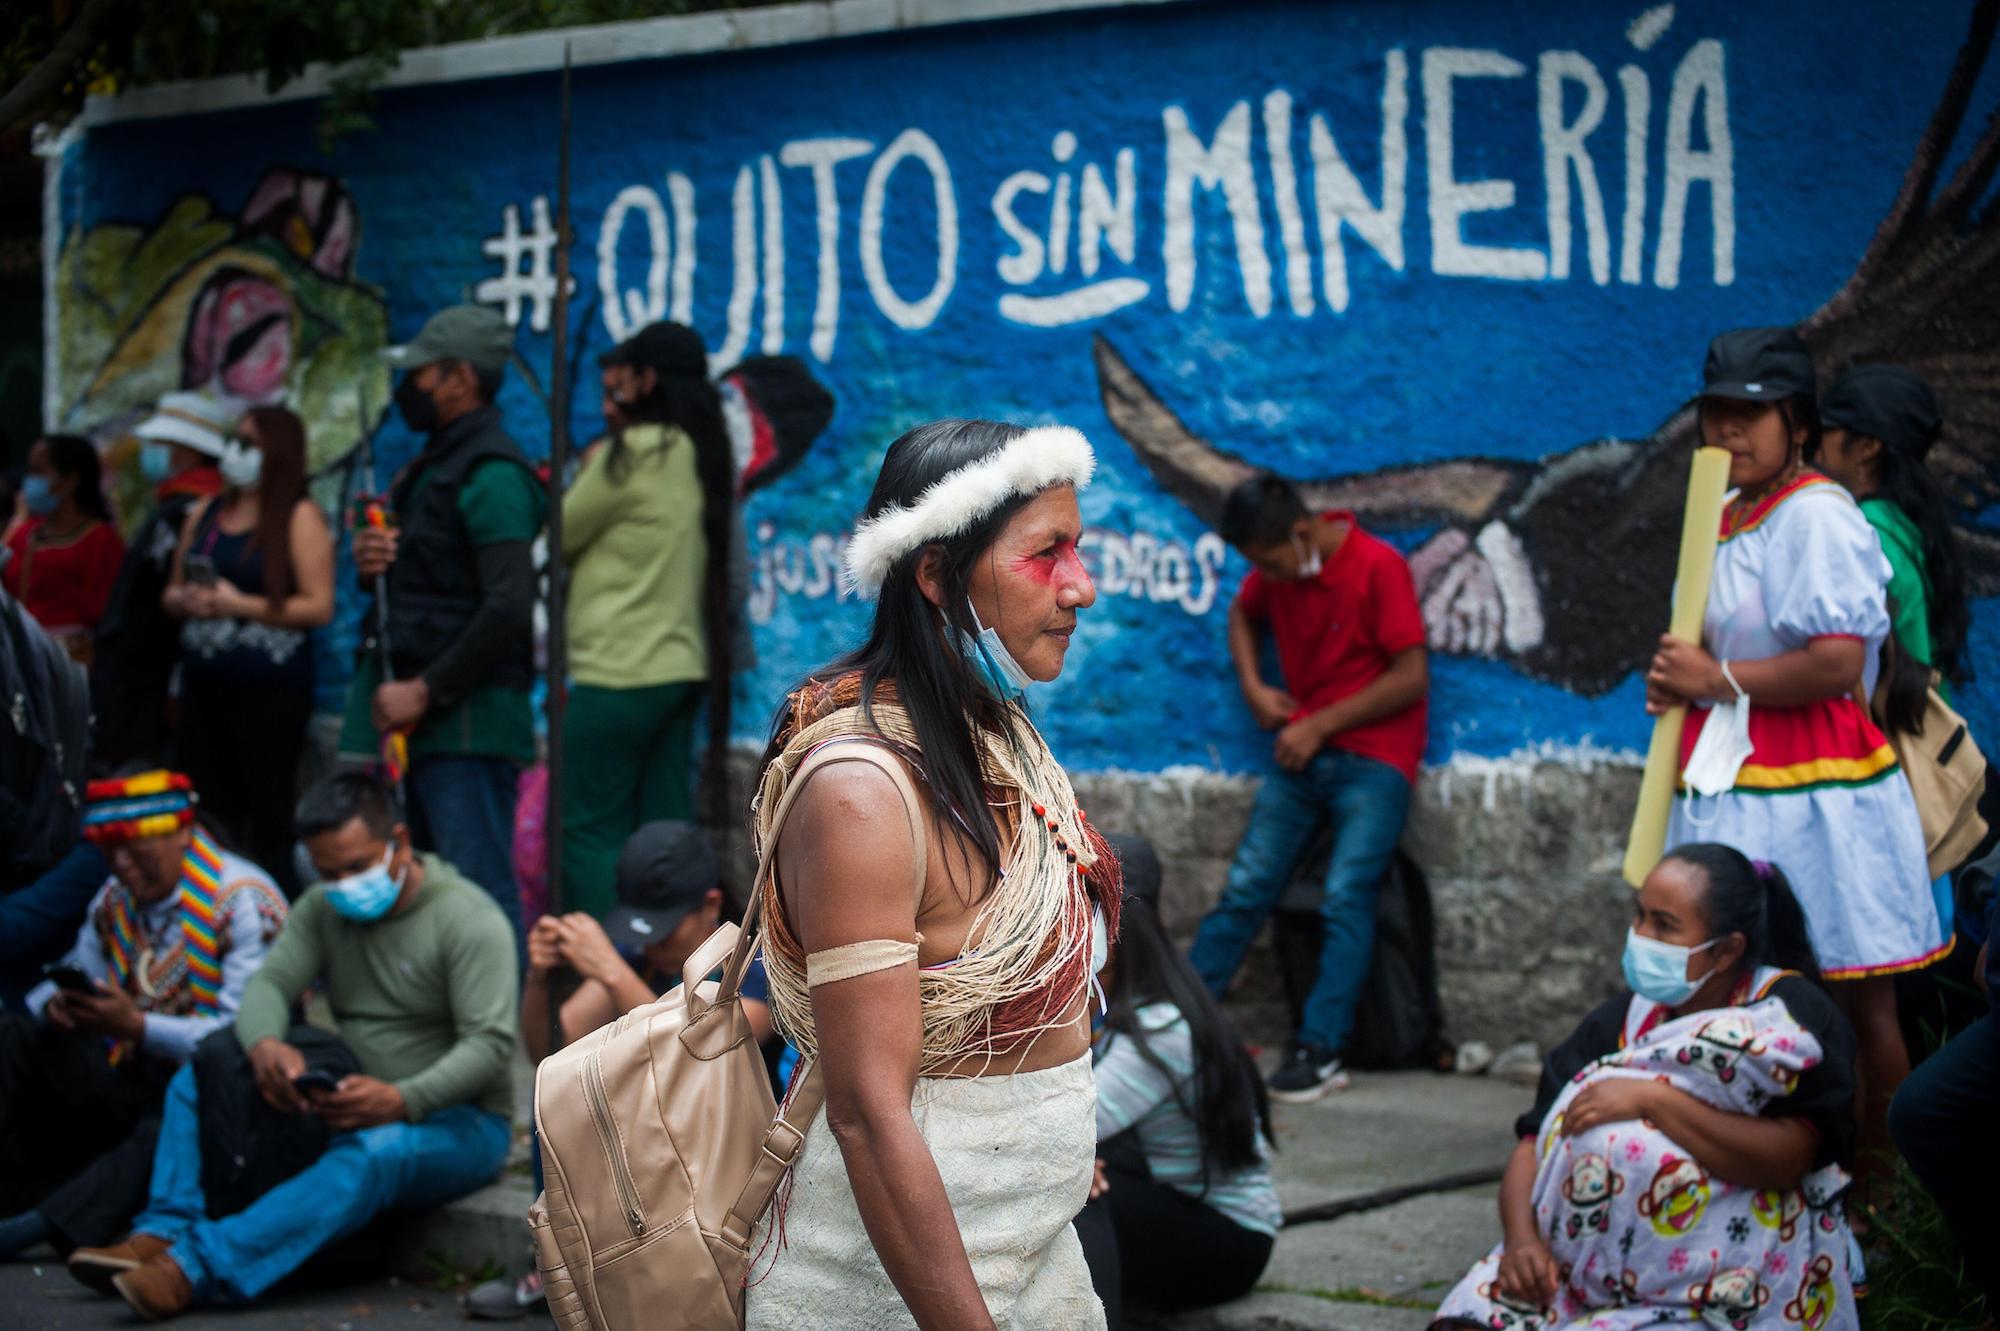 <p>#QuitoWithoutMining, reads a message on a wall during a protest by Indigenous communities in Quito, Ecuador. The Escazú Agreement seeks to guarantee rights of access to information, public participation and justice in environmental matters (Image: Juan Diego Montenegro / Alamy)</p>